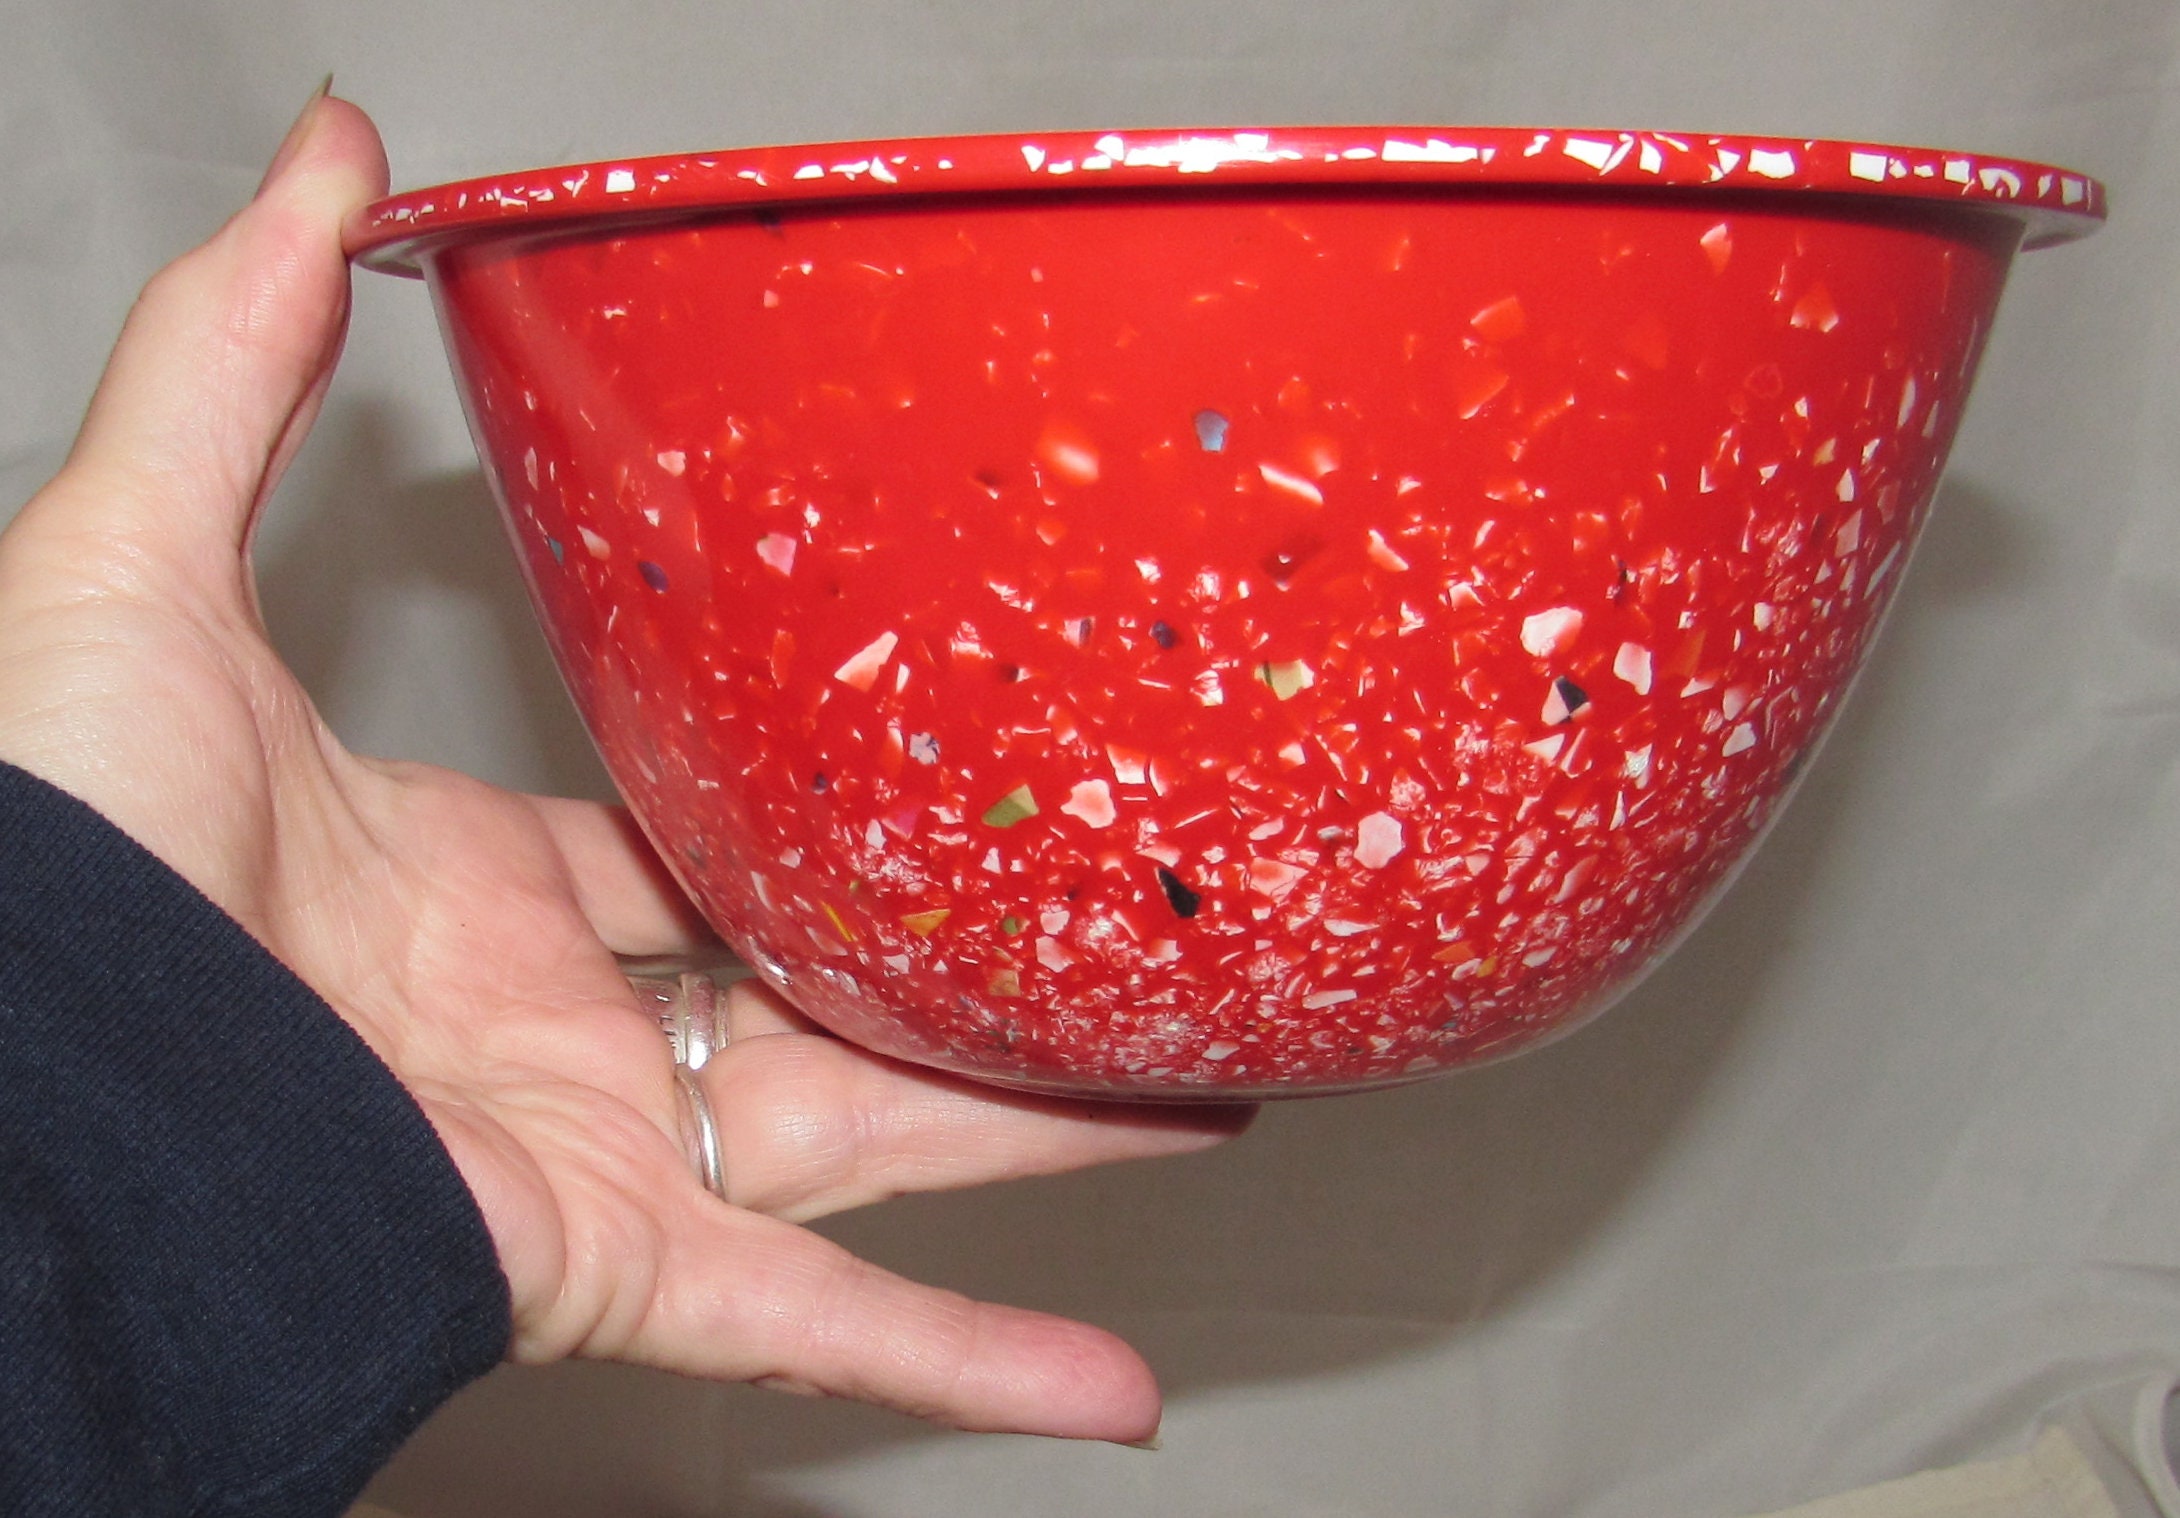 Zak Designs Assorted Red Confetti Recycled Plastic Mixing Bowls